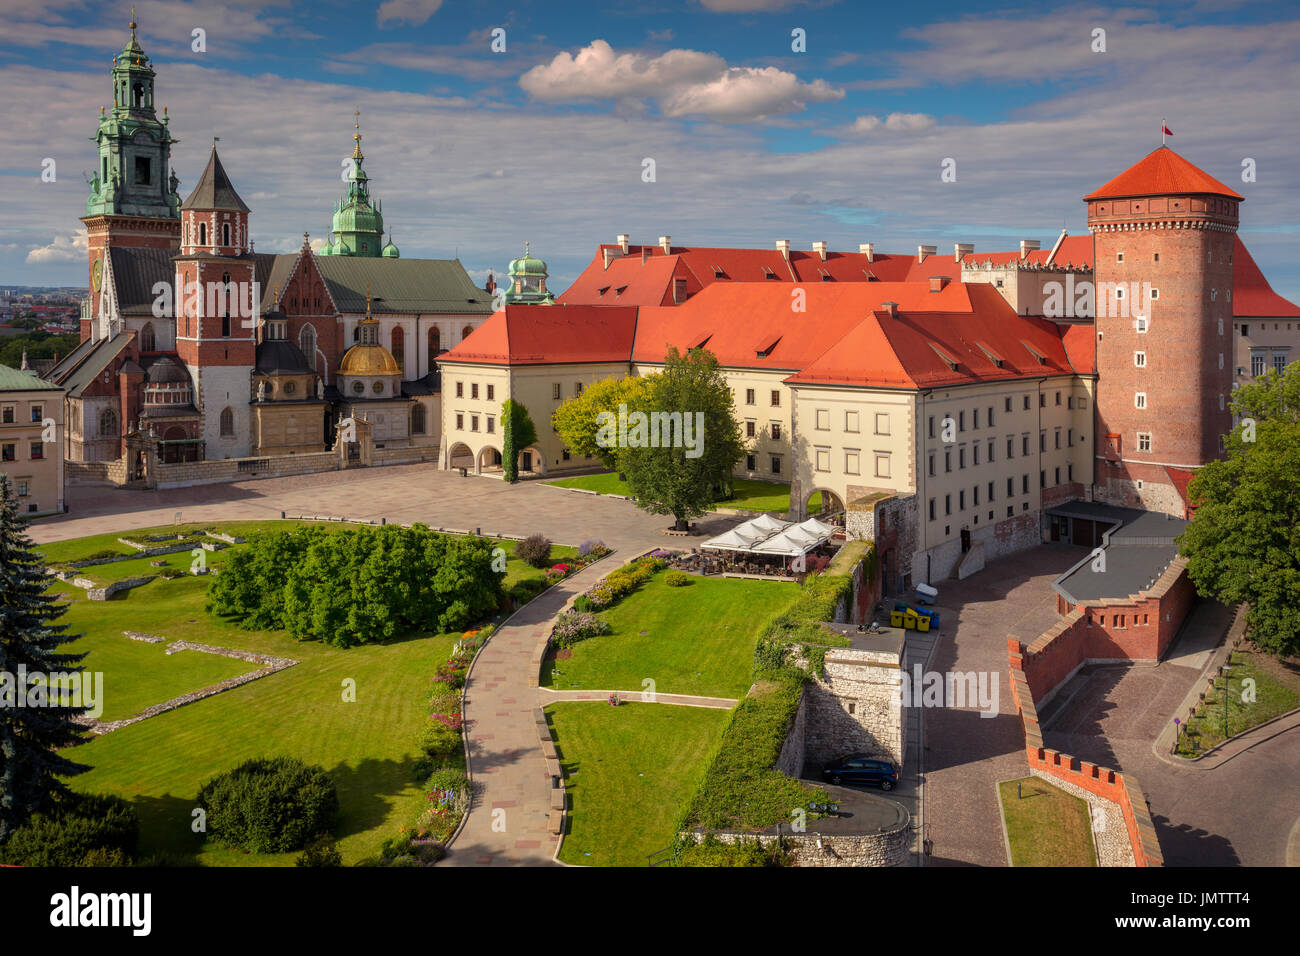 Krakow. Image of old town Krakow, Poland during sunny summer day. Stock Photo